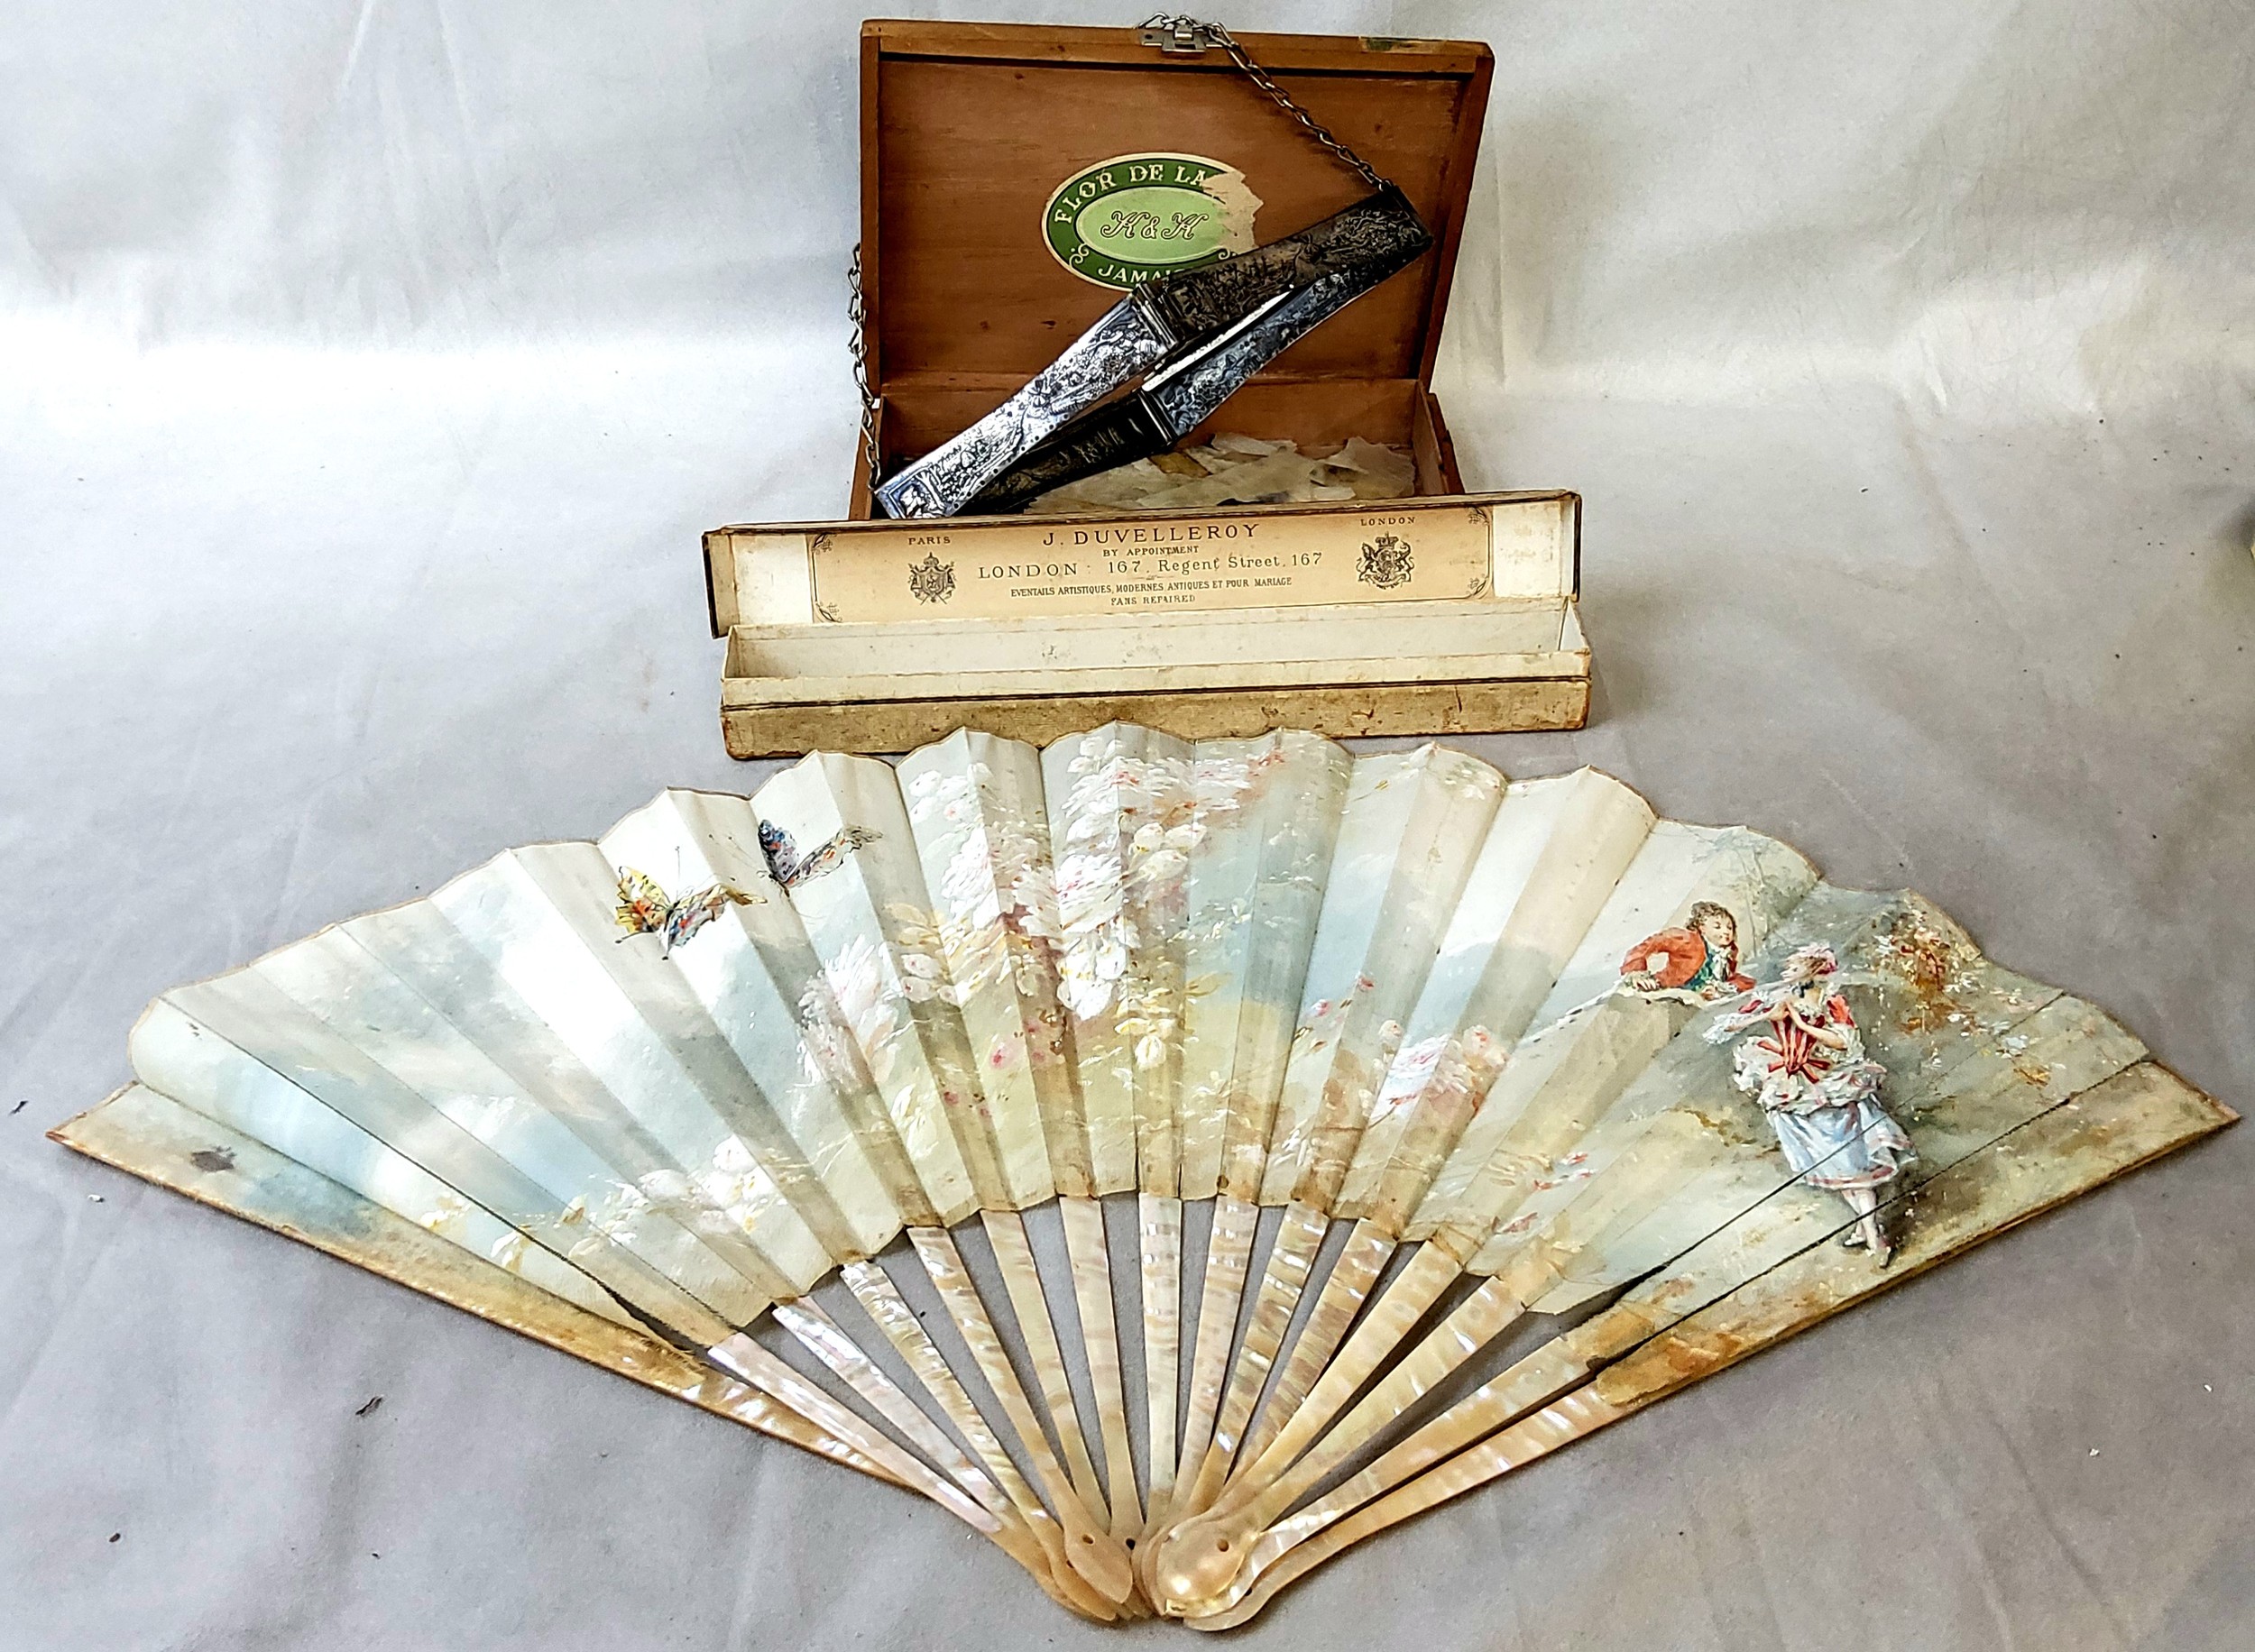 A 19th century French fan, hand painted on linen and ablone/mother of pearl fixtures for